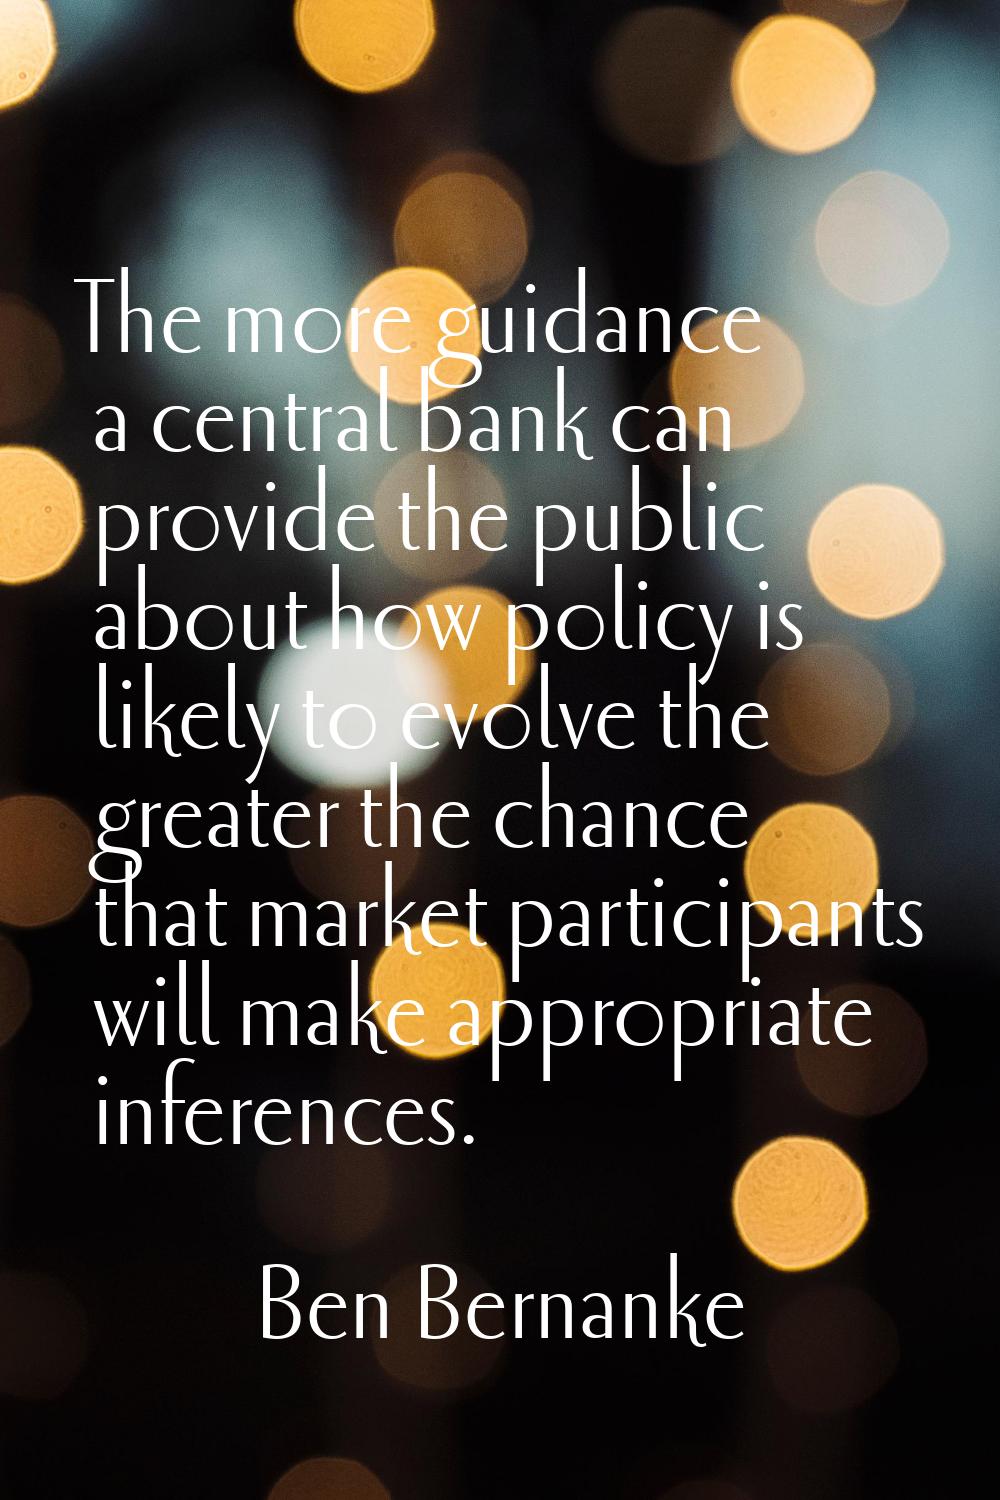 The more guidance a central bank can provide the public about how policy is likely to evolve the gr